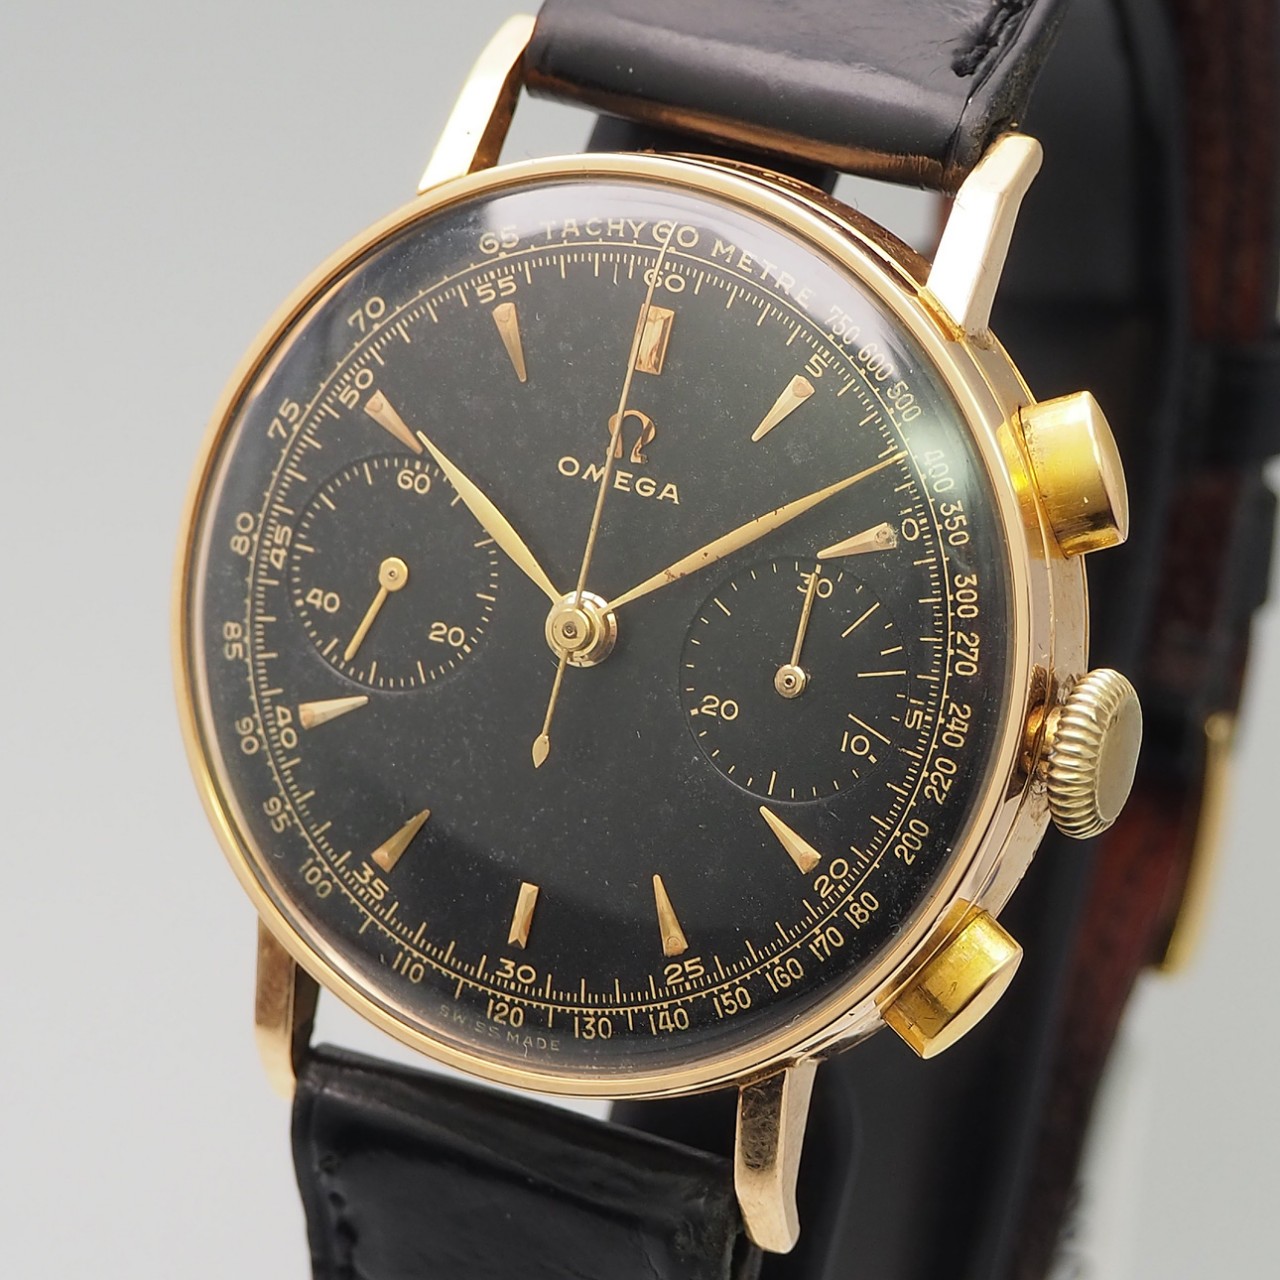 Omega Chronograph Vintage OT2393, Cal.33.3, Gold 18k/750, Box+archive-extract